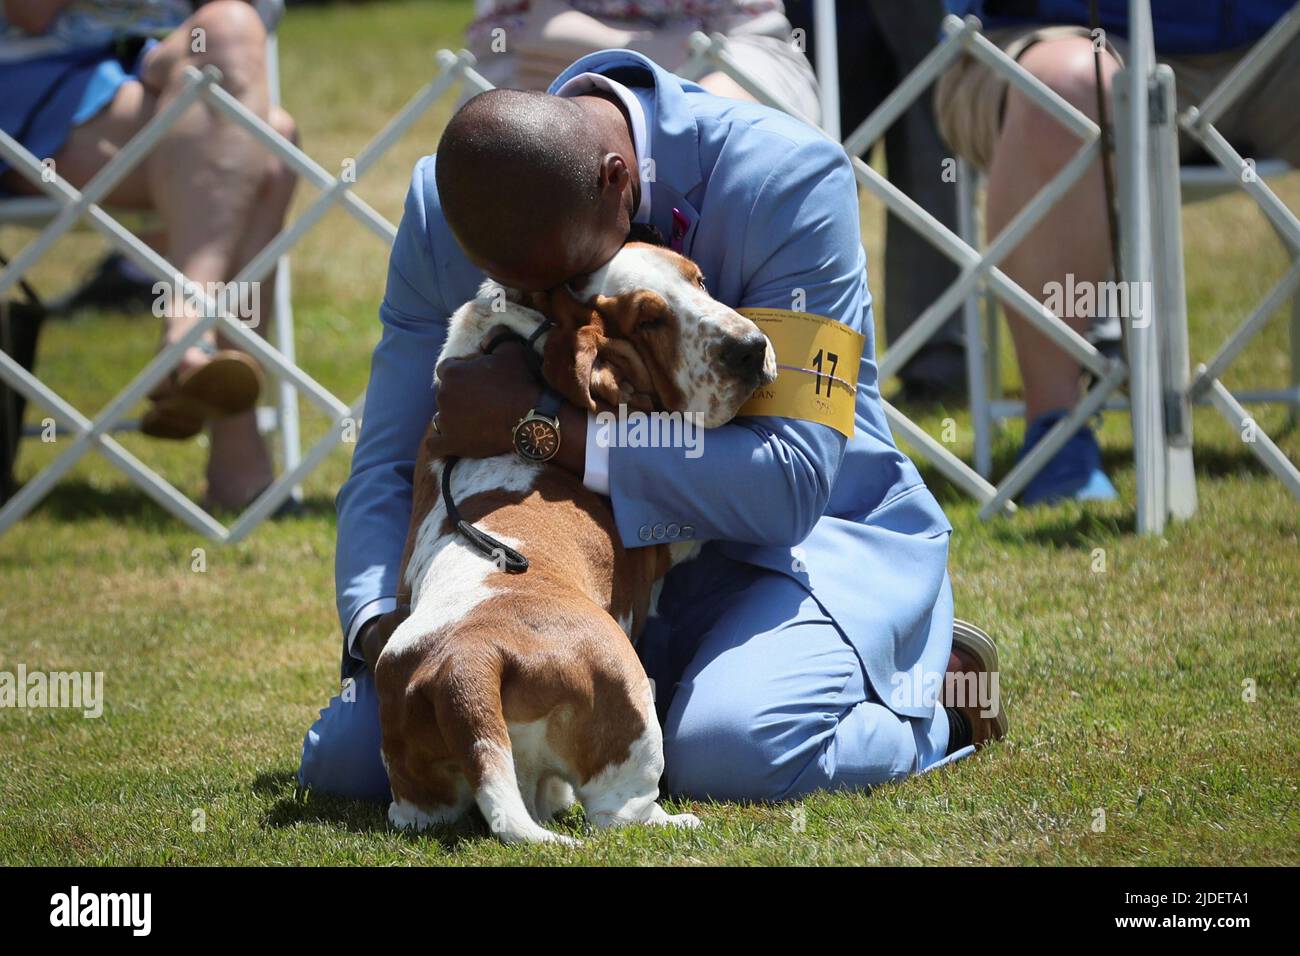 Handler Claudio Cruz embraces Ethan, a Basset Hound, after winning the 'Best of Breed' competition during breed judging at the 146th Westminster Kennel Club Dog Show at the Lyndhurst Estate in Tarrytown, New York, U.S., June 20, 2022. REUTERS/Mike Segar Stock Photo